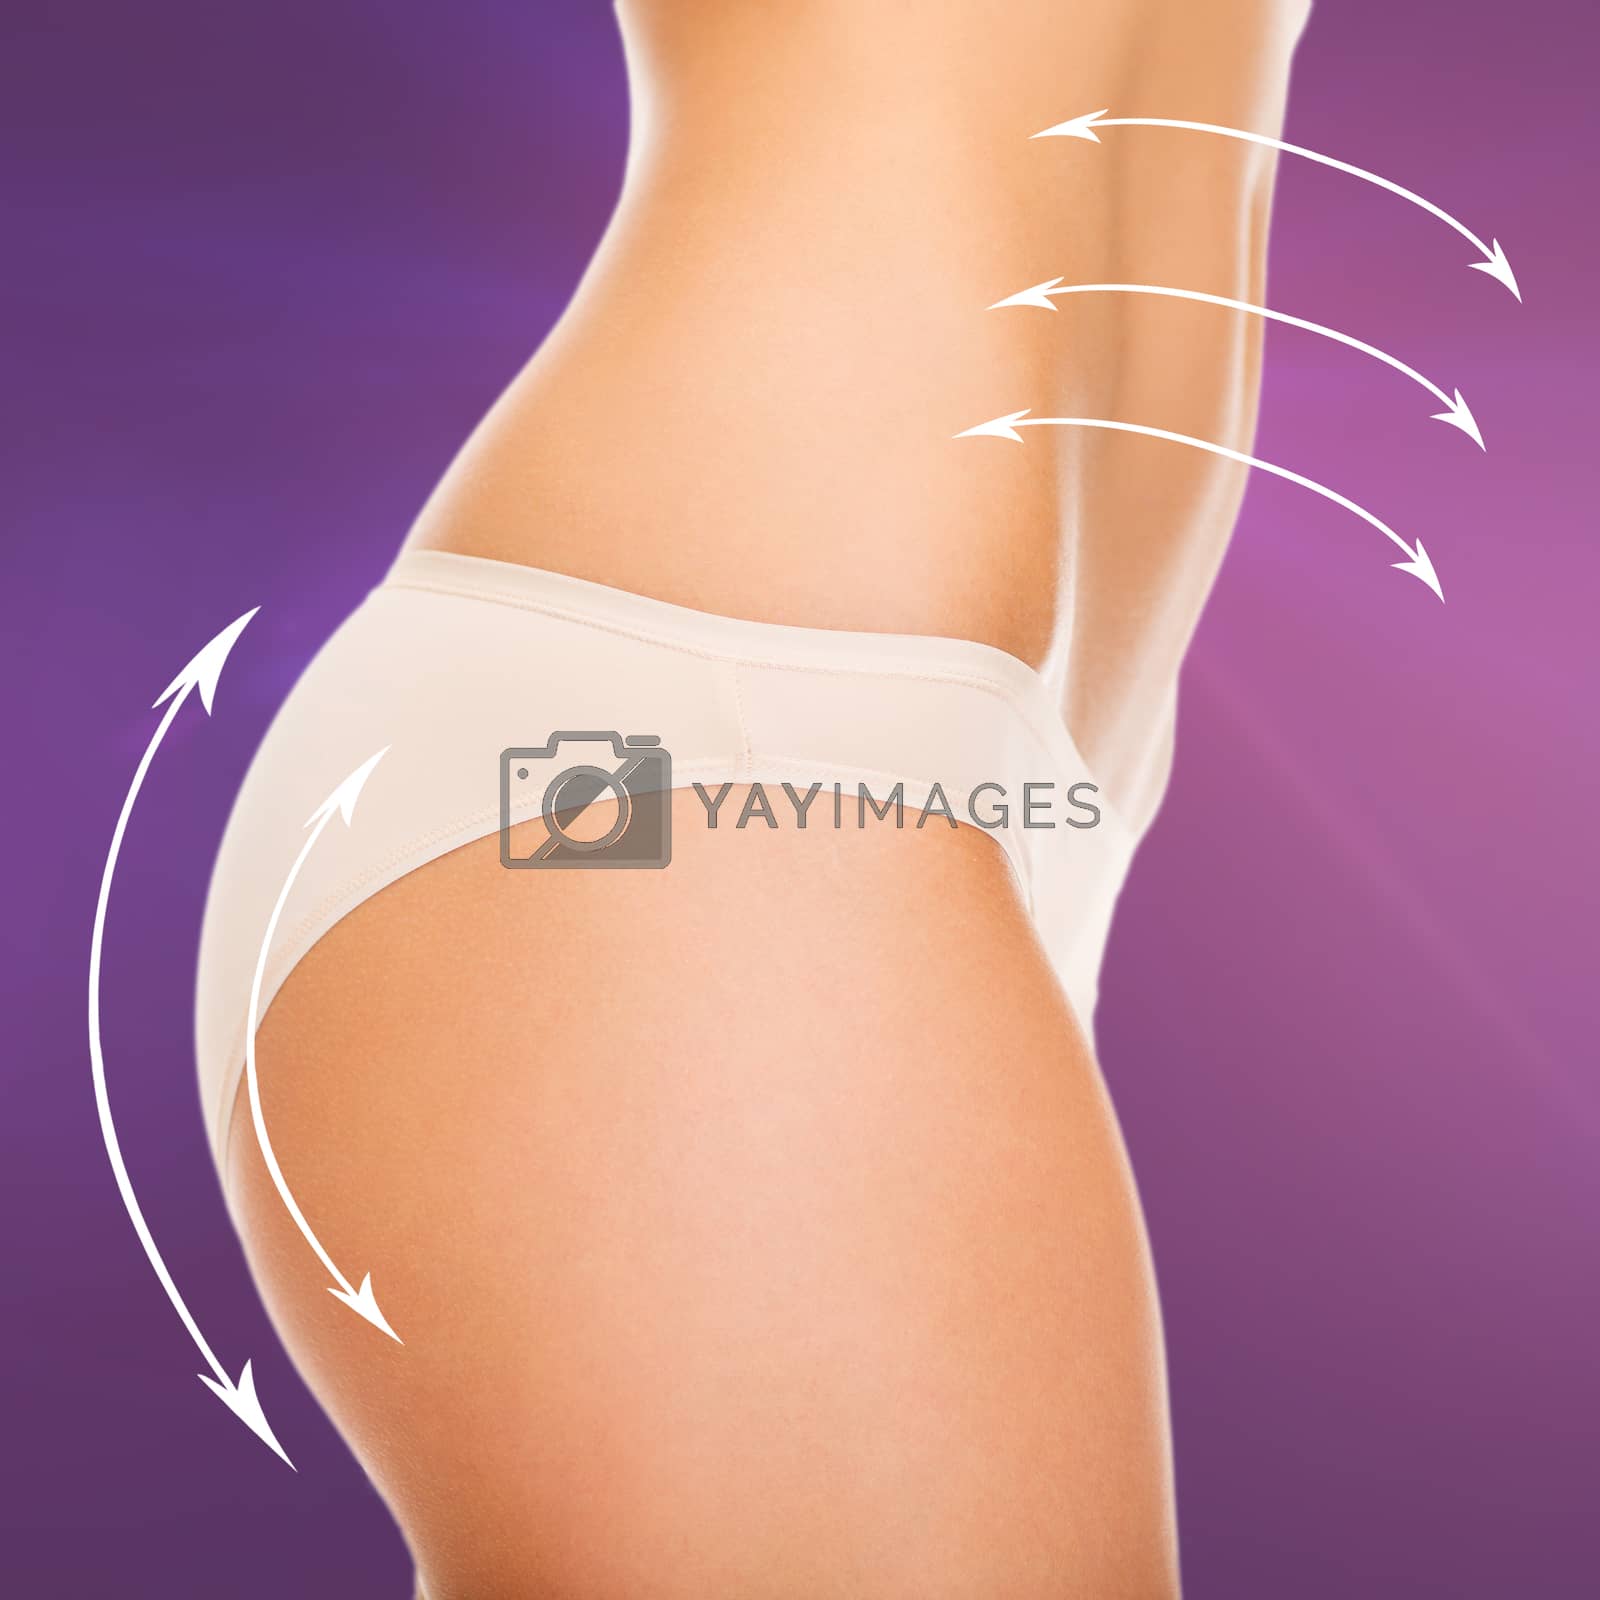 Royalty free image of woman in cotton underwear showing slimming concept by dolgachov